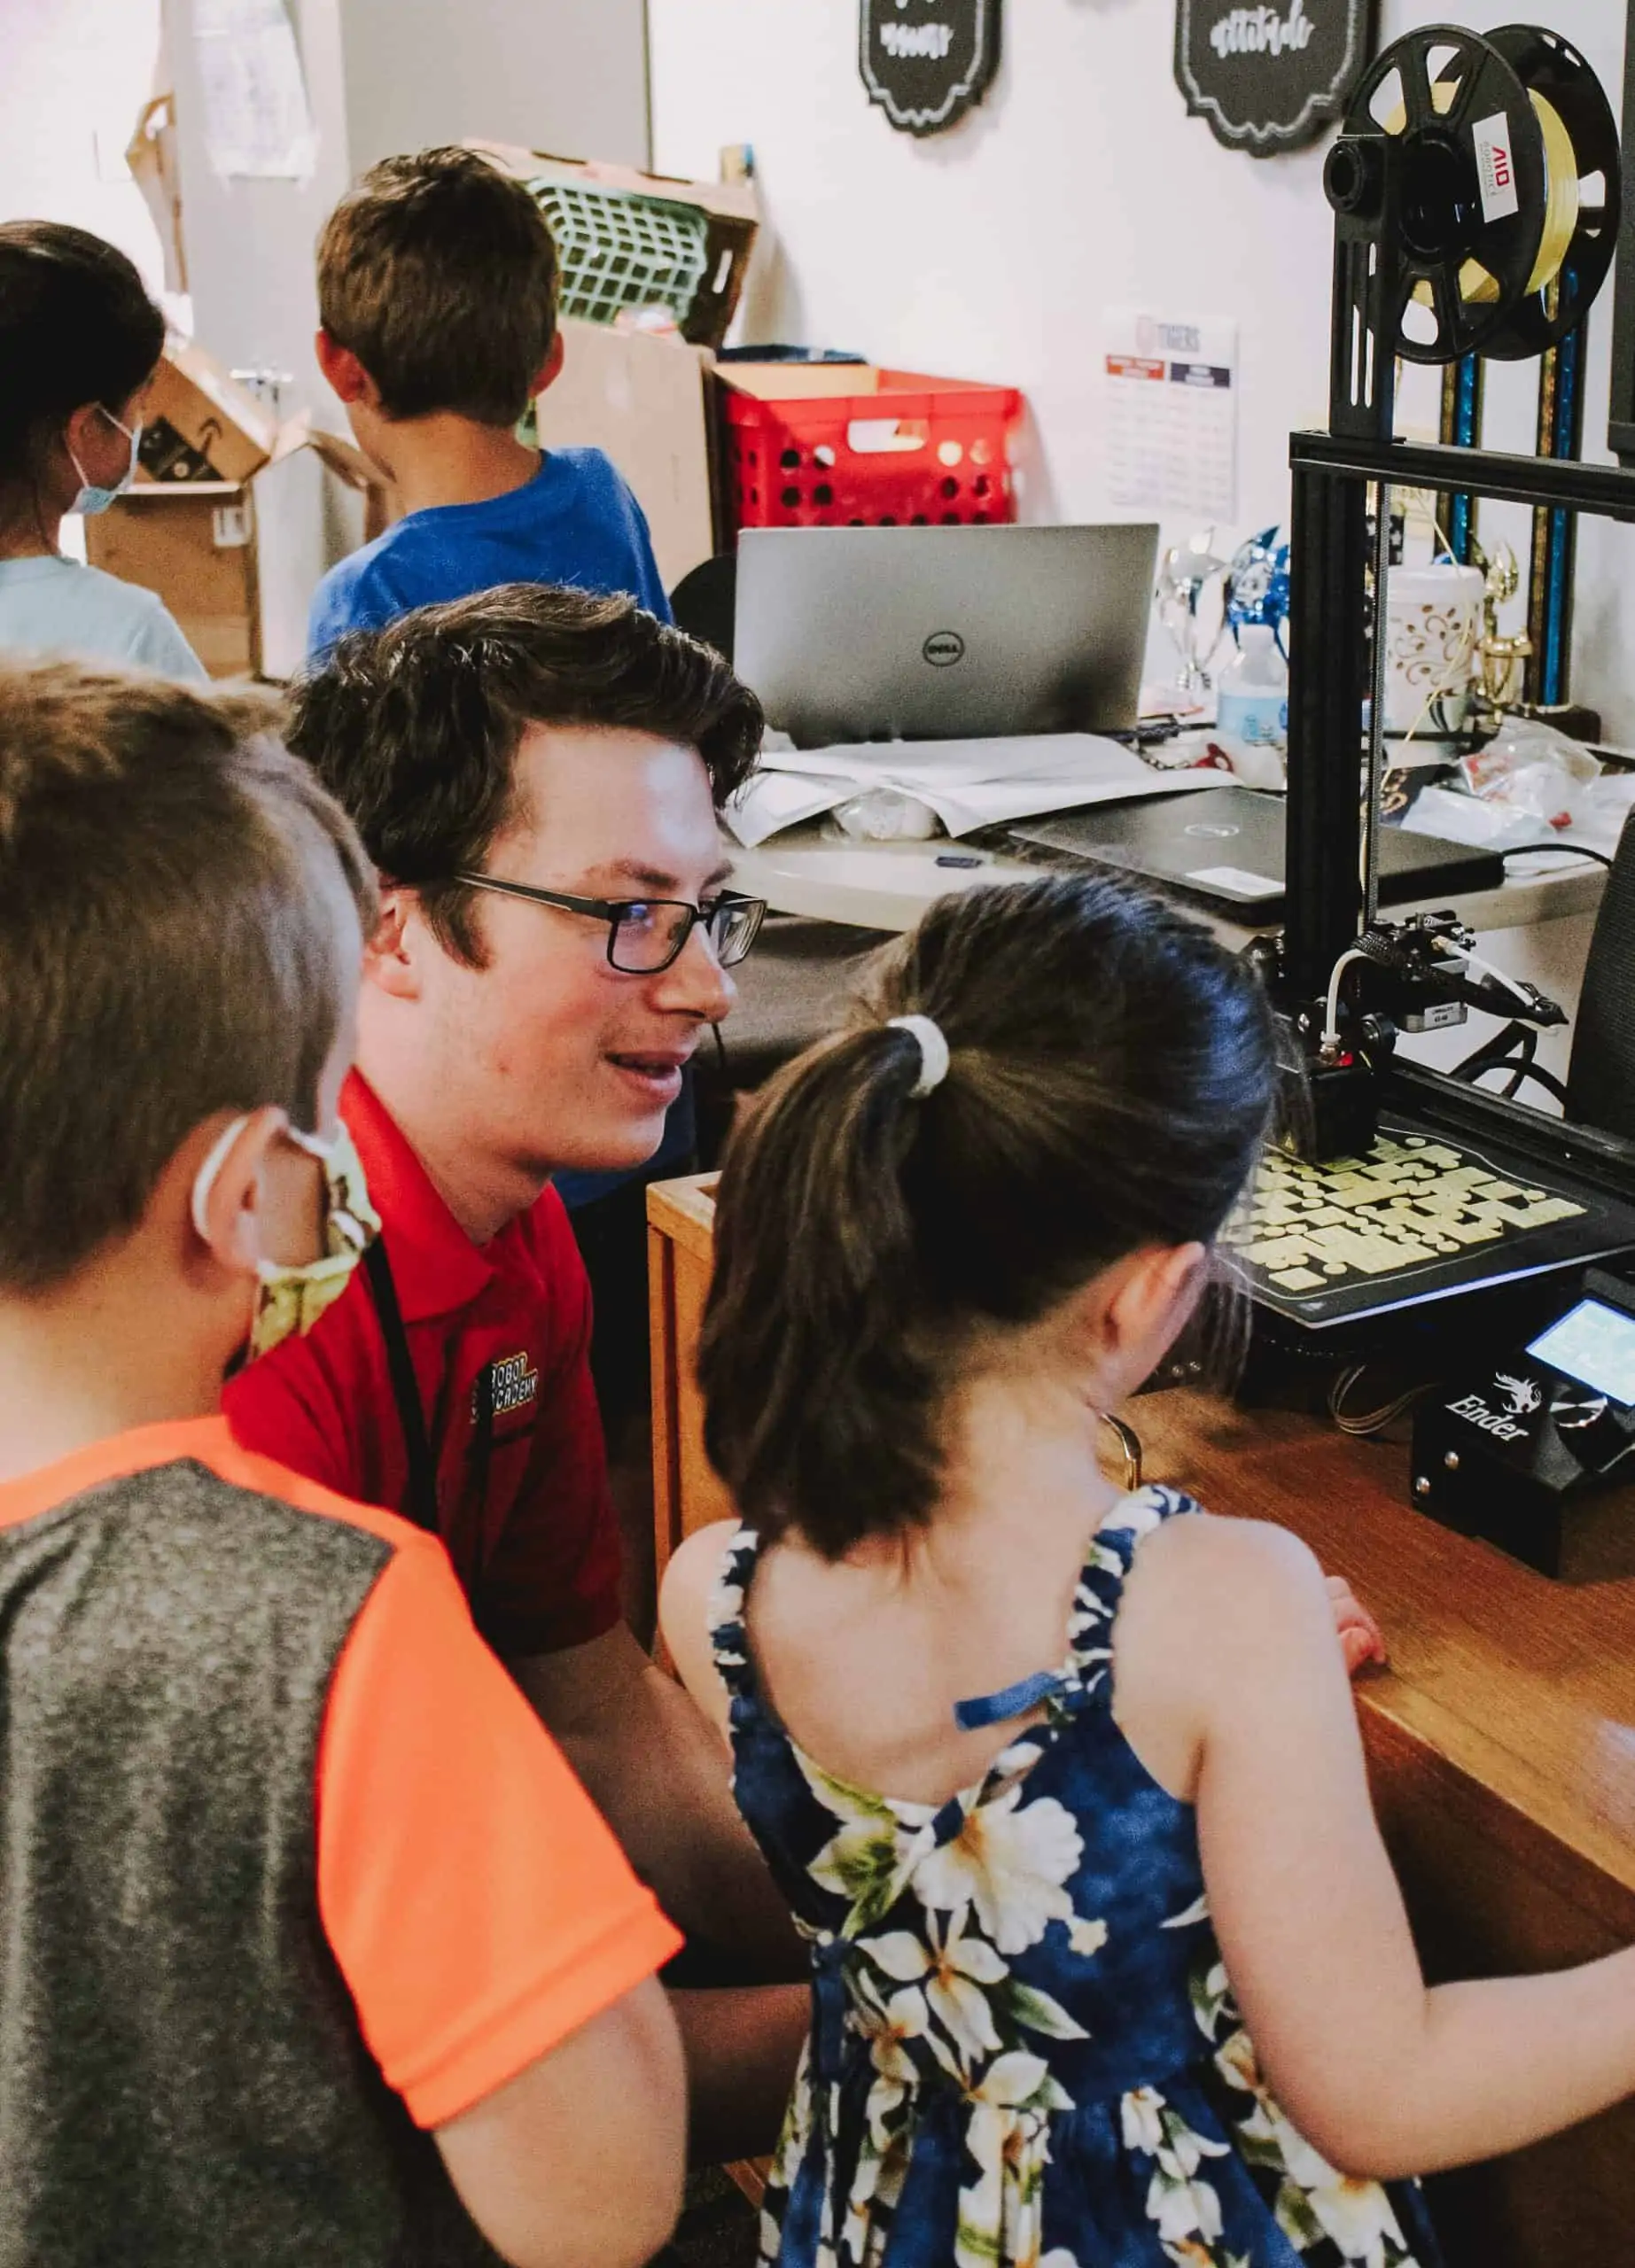 You are currently viewing Jr. LEGO® Robotics & 3D Printing Camp for ages 5 to 8 | Full Day | 2 Days: June 12-13, 2023 | 9 am to 5 pm | Dublin – Register at Dublin Rec Center